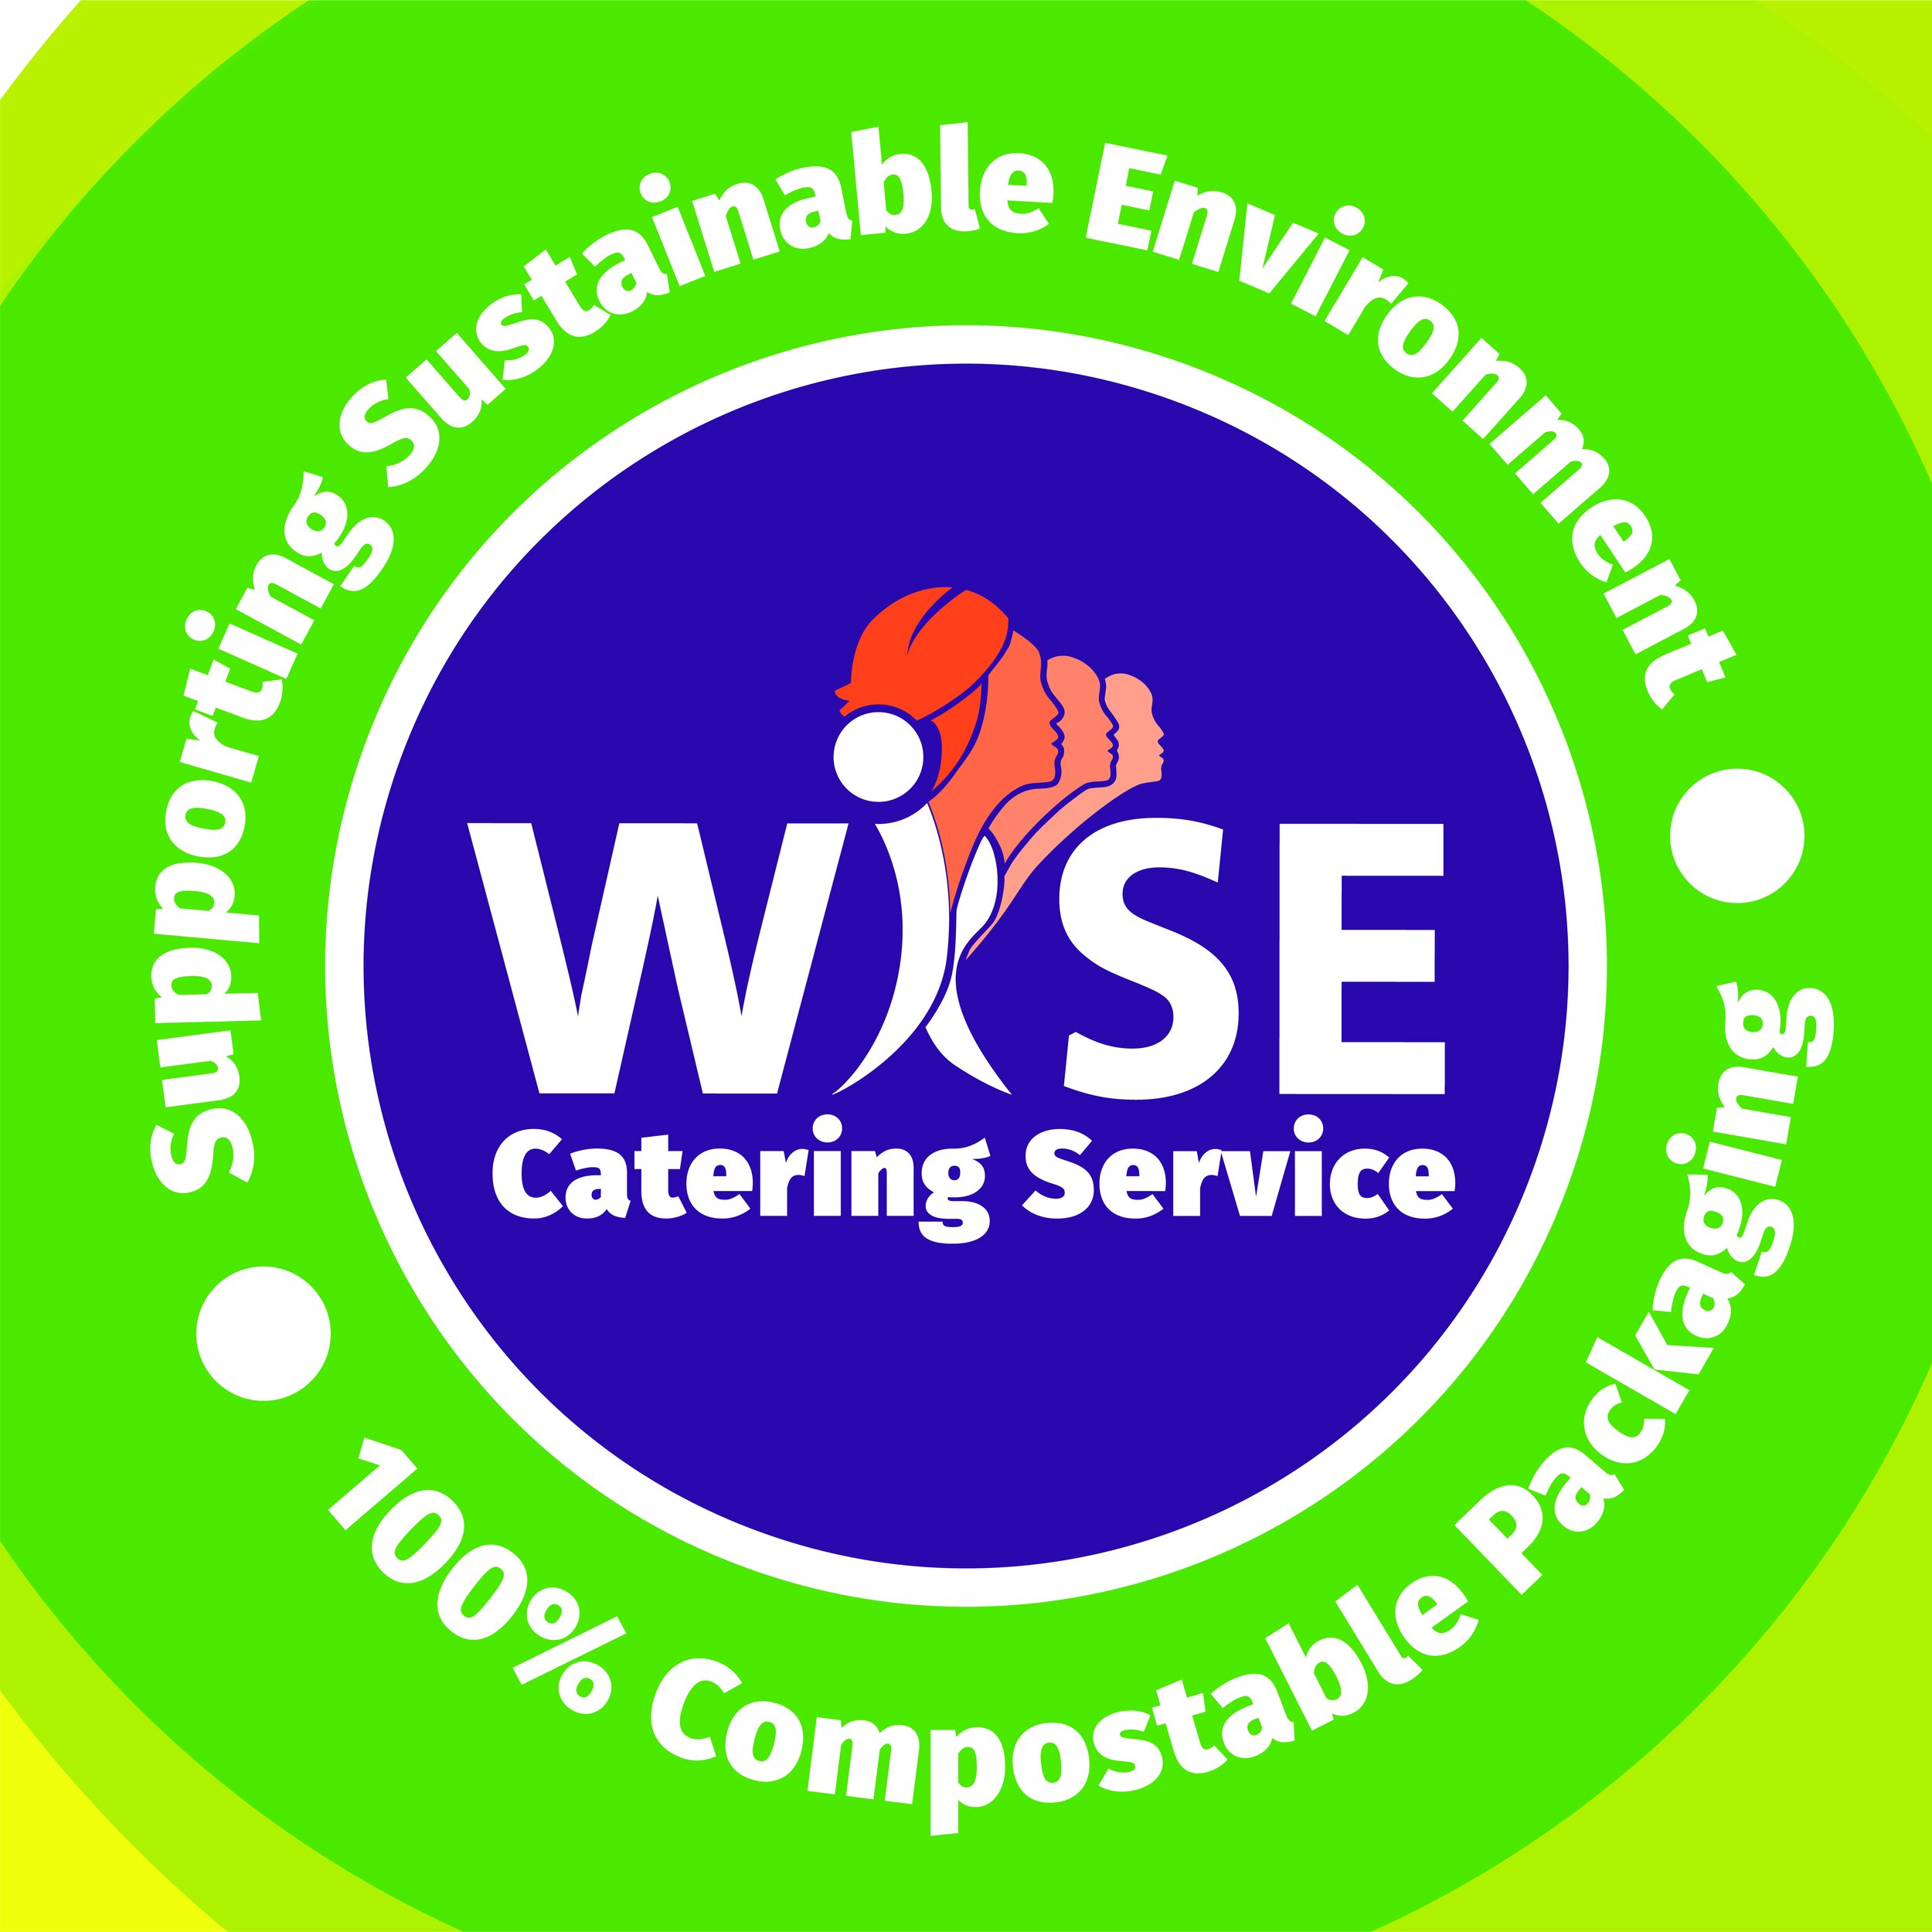 WISE Catering